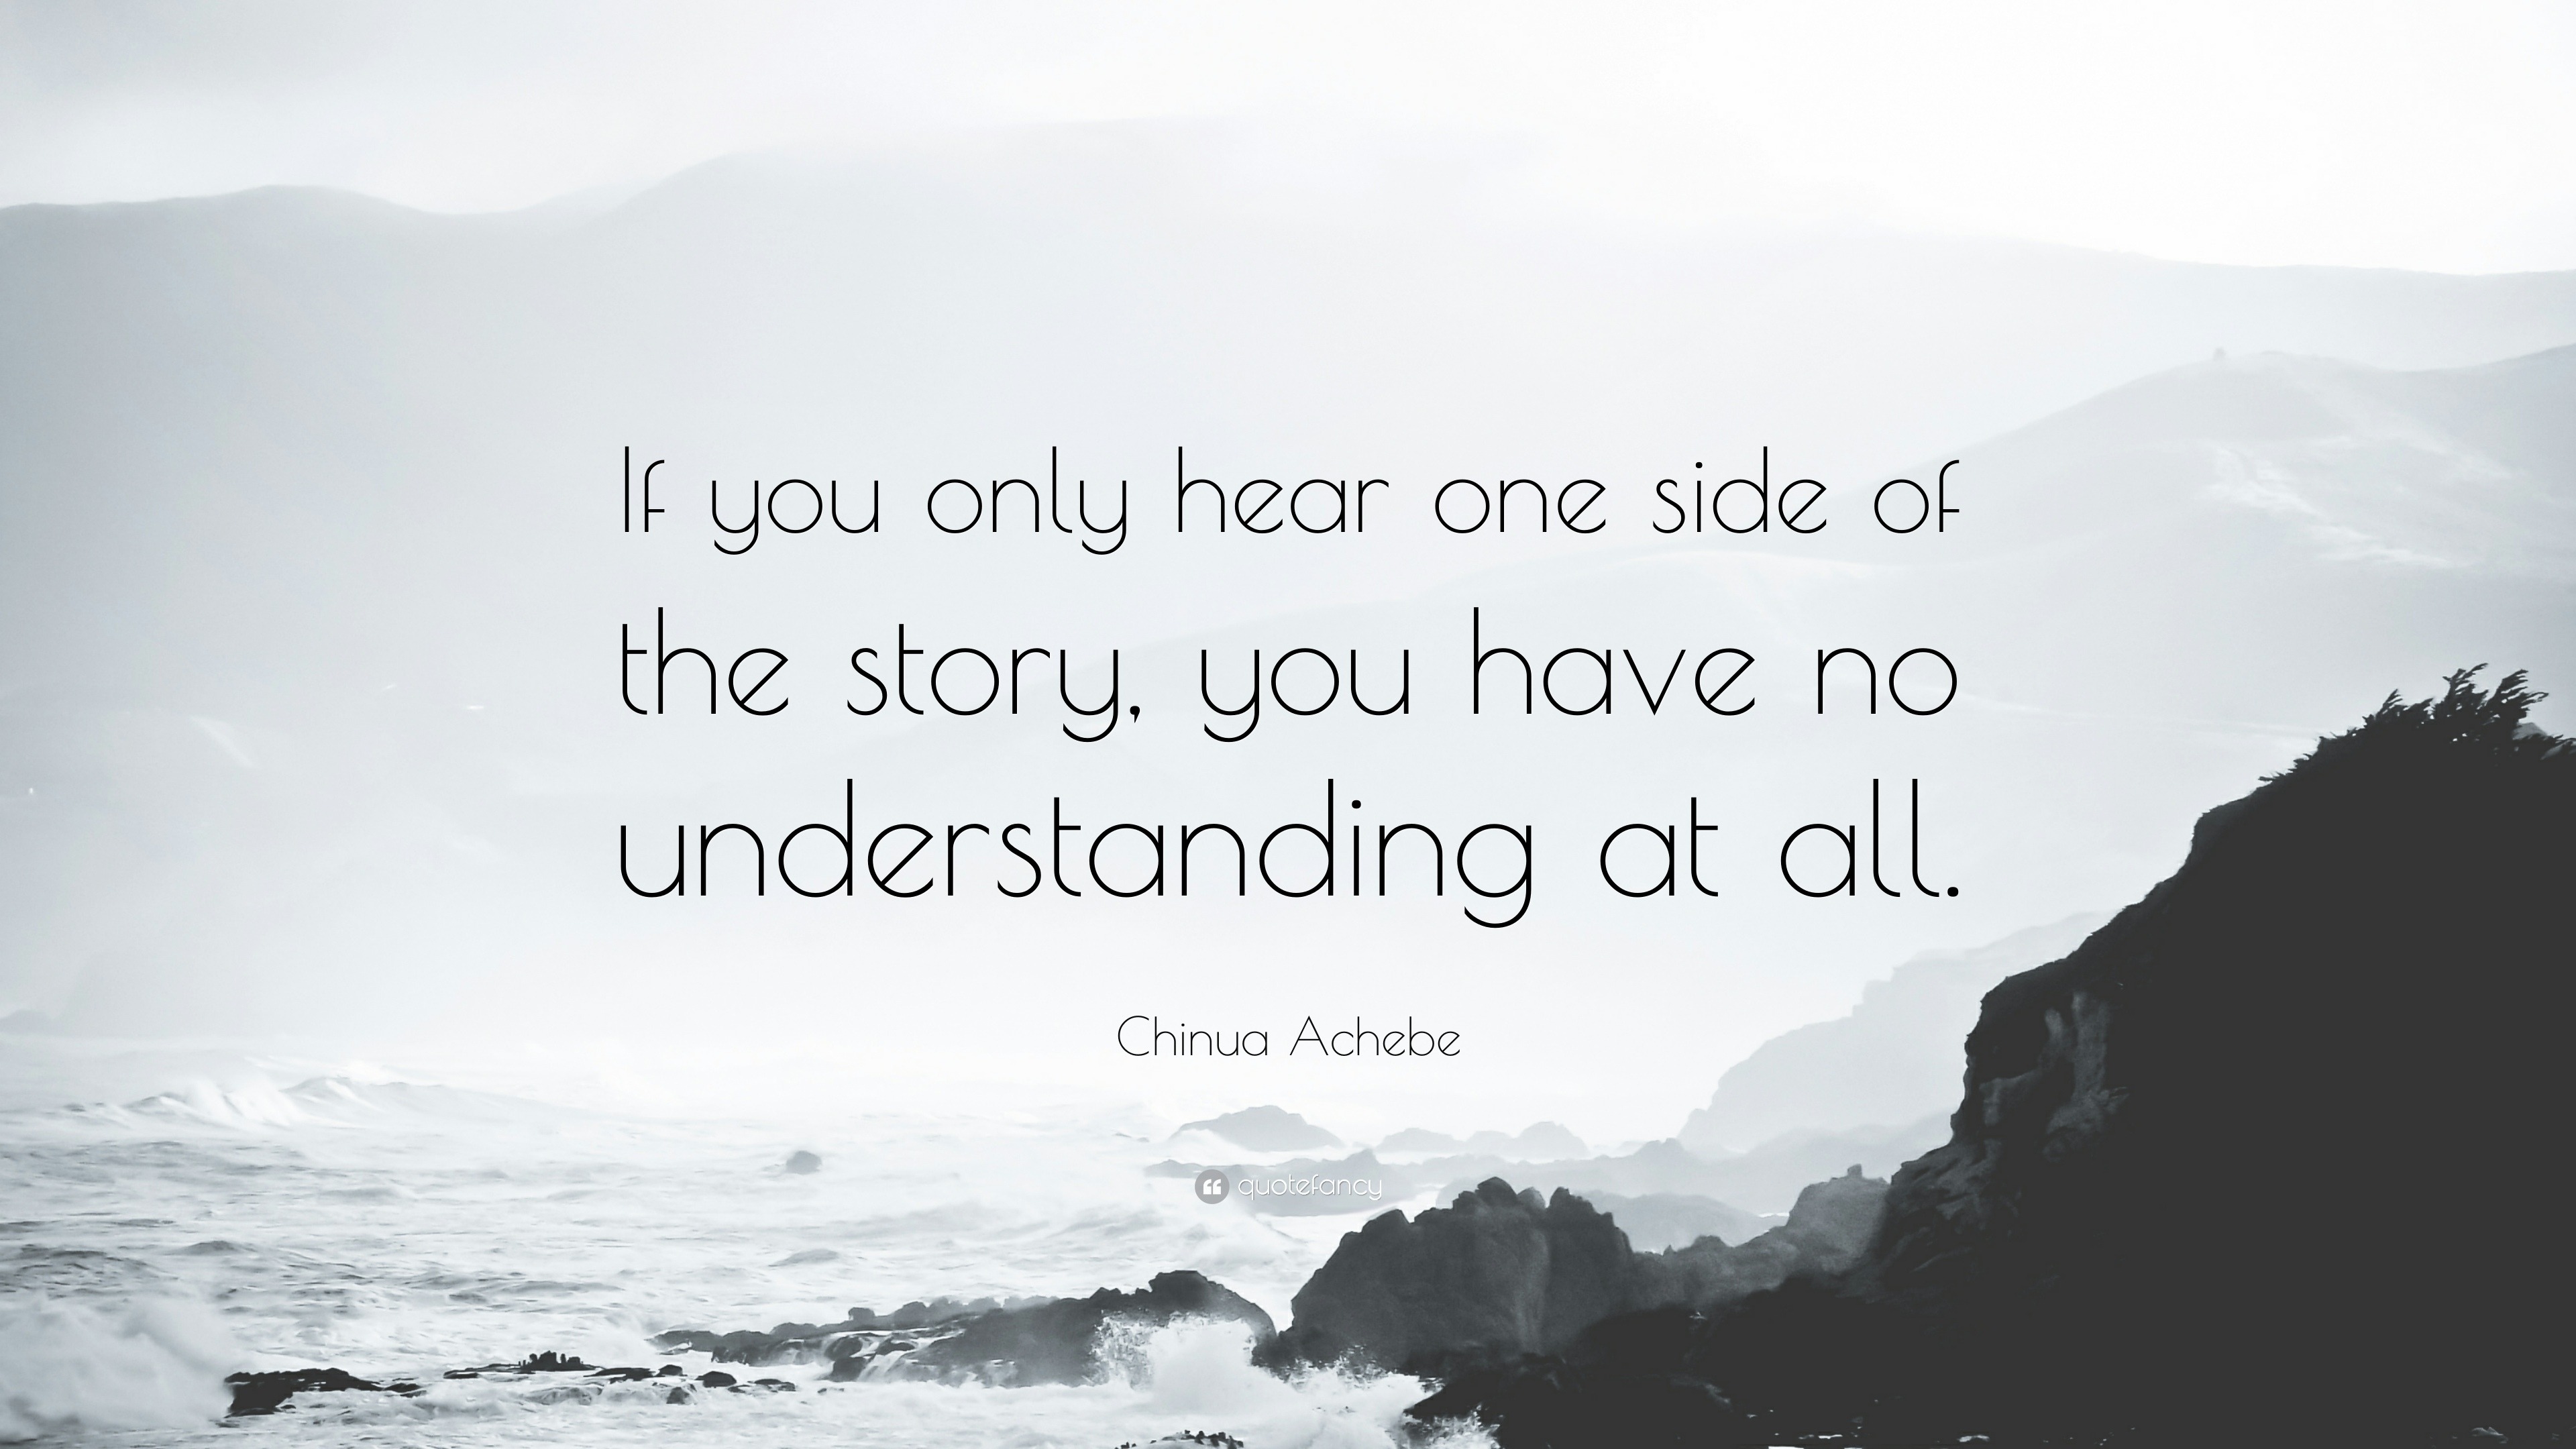 Chinua Achebe Quote: “If you only hear one side of the story, you